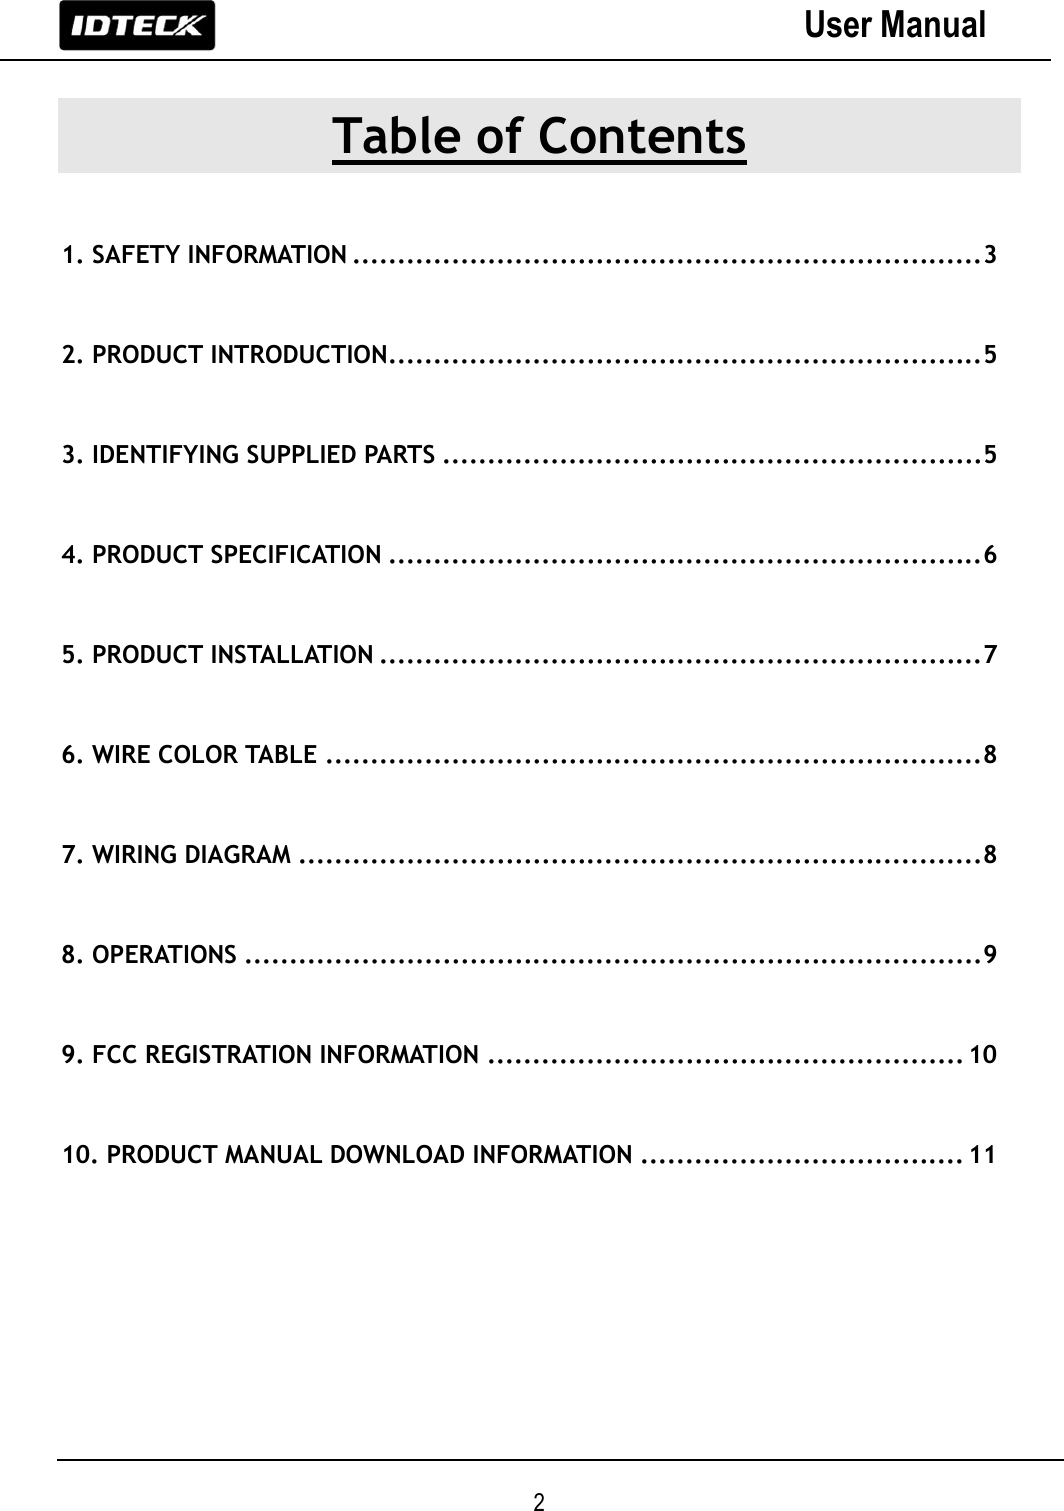                                                                 2 User Manual  Table of Contents  1. SAFETY INFORMATION ...................................................................... 3  2. PRODUCT INTRODUCTION .................................................................. 5  3. IDENTIFYING SUPPLIED PARTS ............................................................ 5  4. PRODUCT SPECIFICATION .................................................................. 6  5. PRODUCT INSTALLATION ................................................................... 7  6. WIRE COLOR TABLE ......................................................................... 8  7. WIRING DIAGRAM ............................................................................ 8  8. OPERATIONS .................................................................................. 9  9. FCC REGISTRATION INFORMATION ..................................................... 10  10. PRODUCT MANUAL DOWNLOAD INFORMATION .................................... 11        